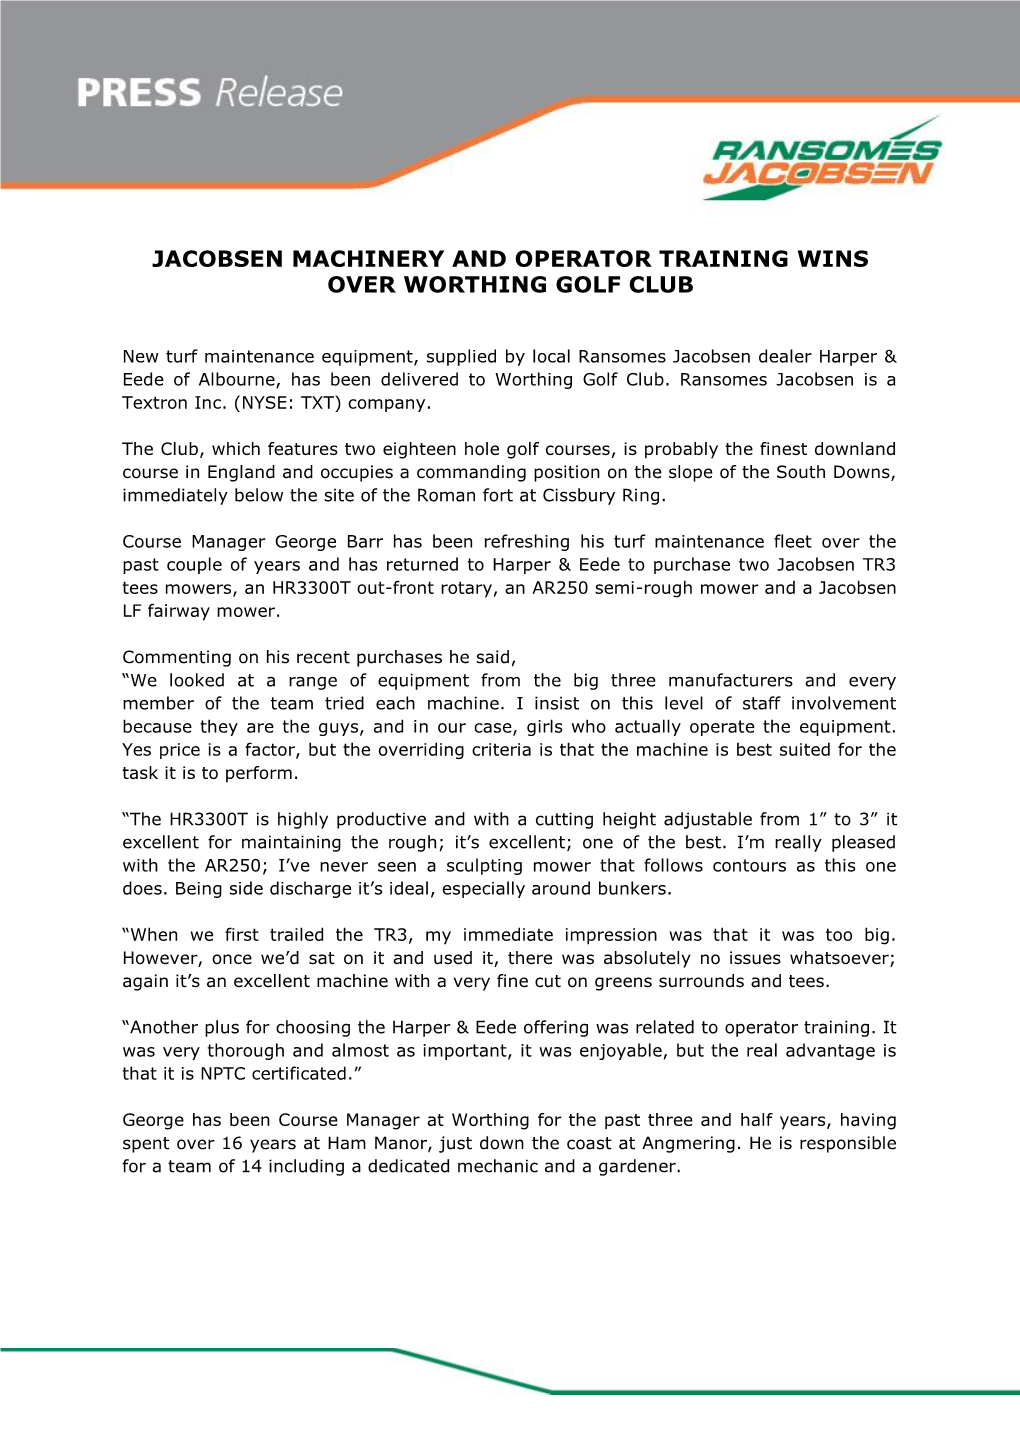 Jacobsen Machinery and Operator Training Wins Over Worthing Golf Club